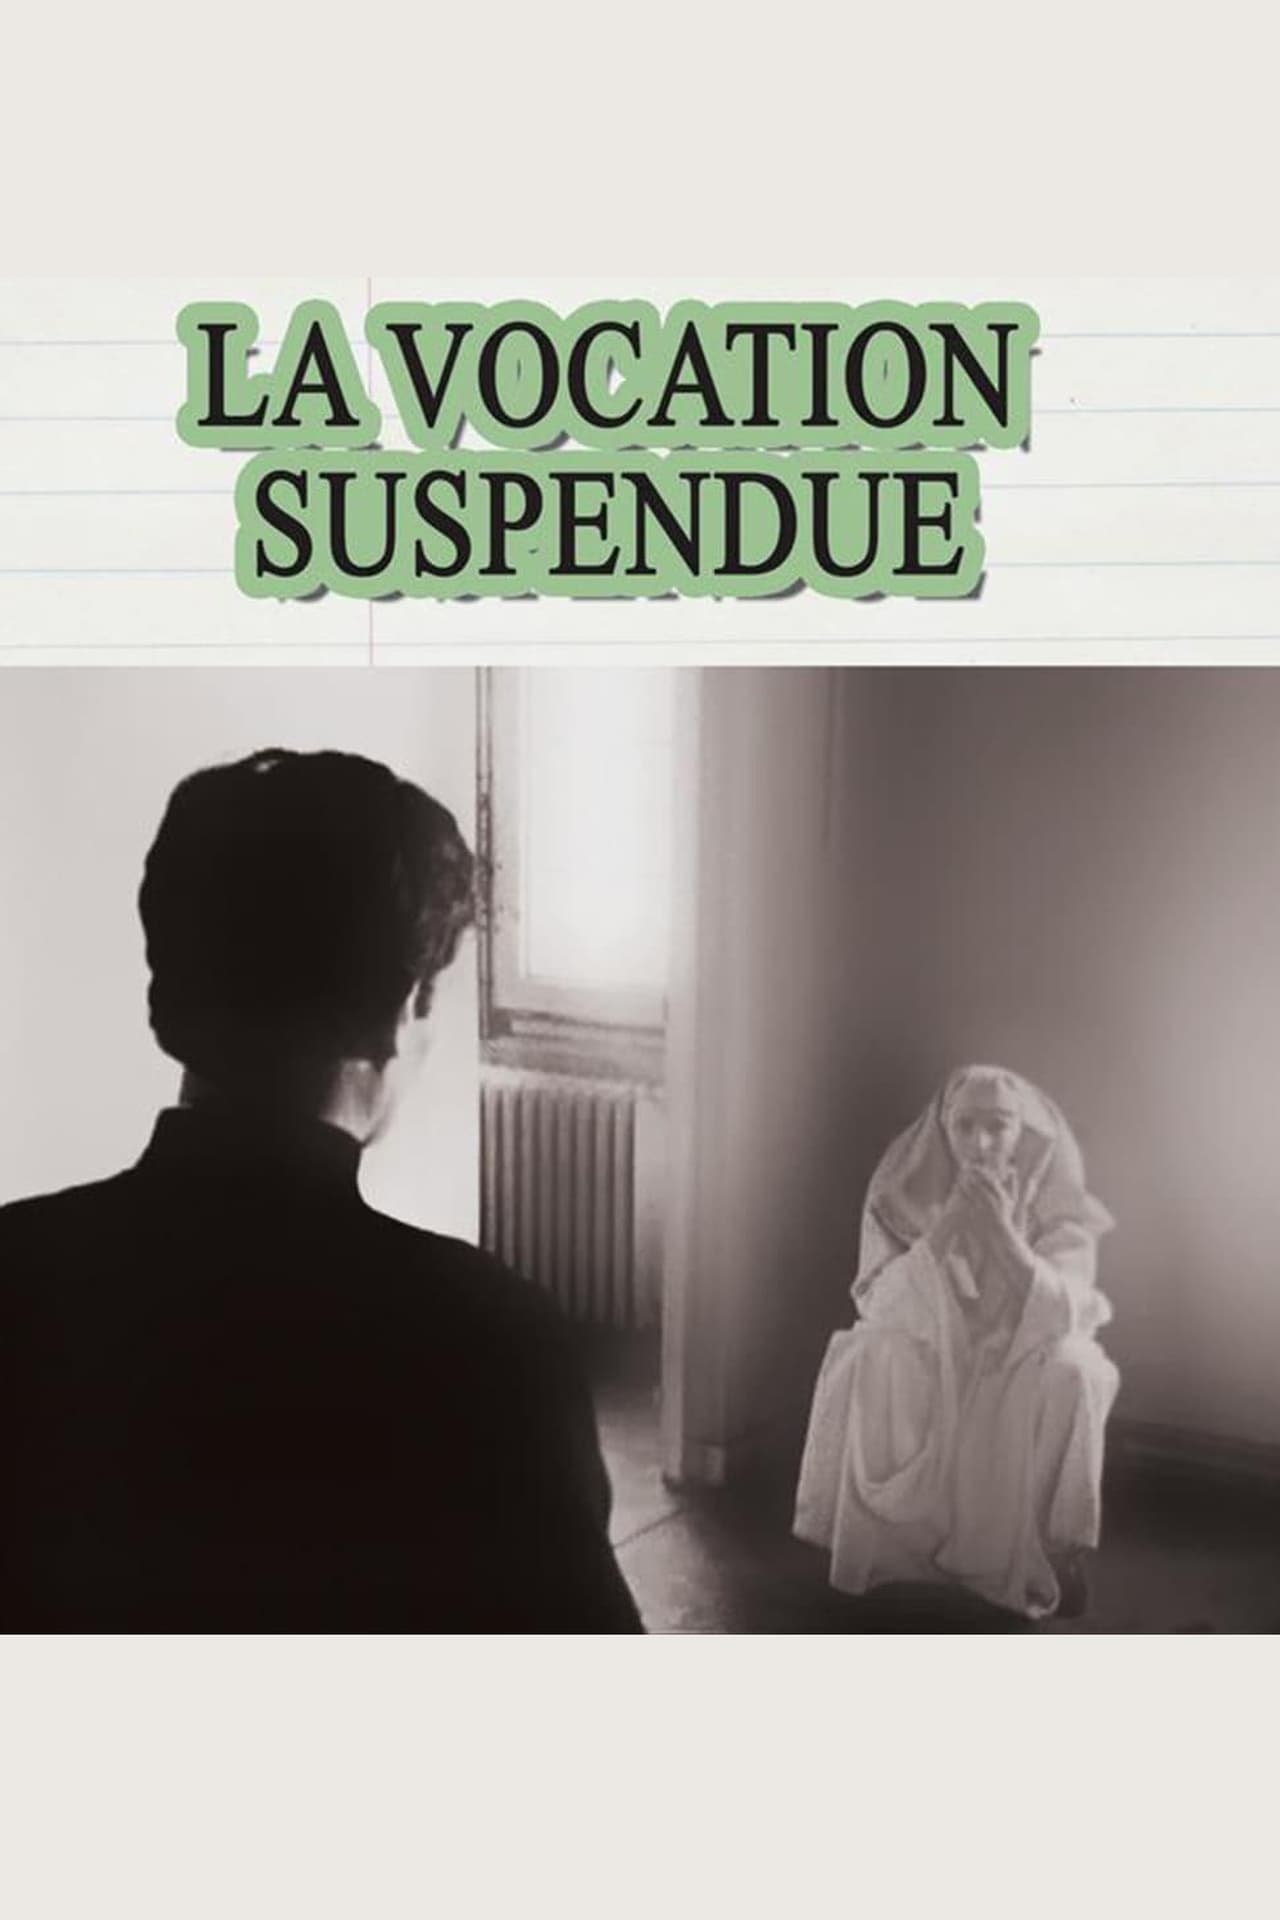 The Suspended Vocation (1978)